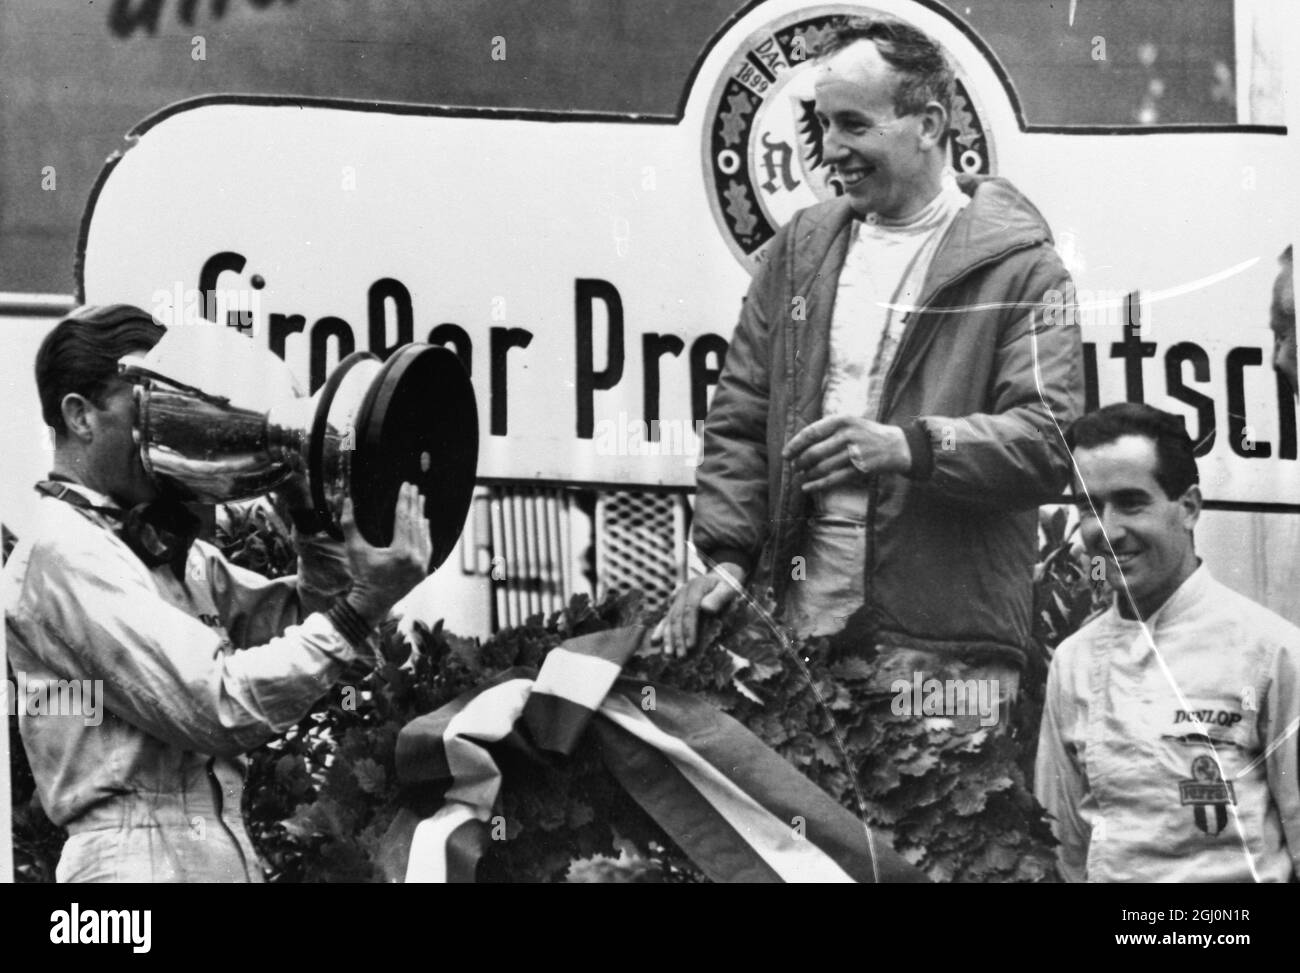 John Surtees looks smilingly on as Graham Hill drinks Champagne out of the Gian Cup presented to Surtees after he had won the German Grand Prix at Nurburgring. On the right is Lorenzo Bandini. 1964 Stock Photo